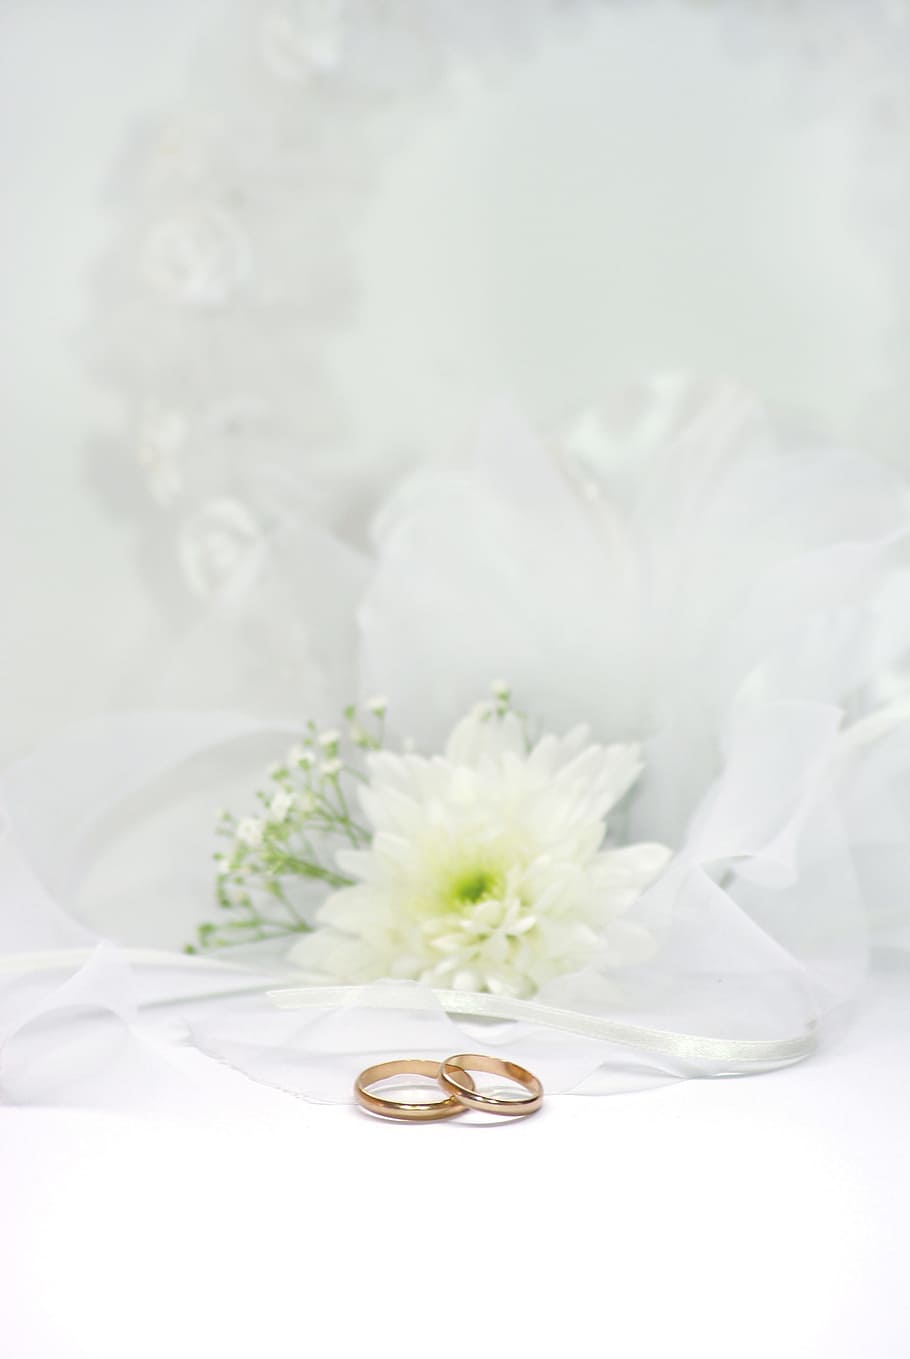 two gold-colored rings, wedding, rings, marry, gold, jewellery, romance, deco, white, flowers